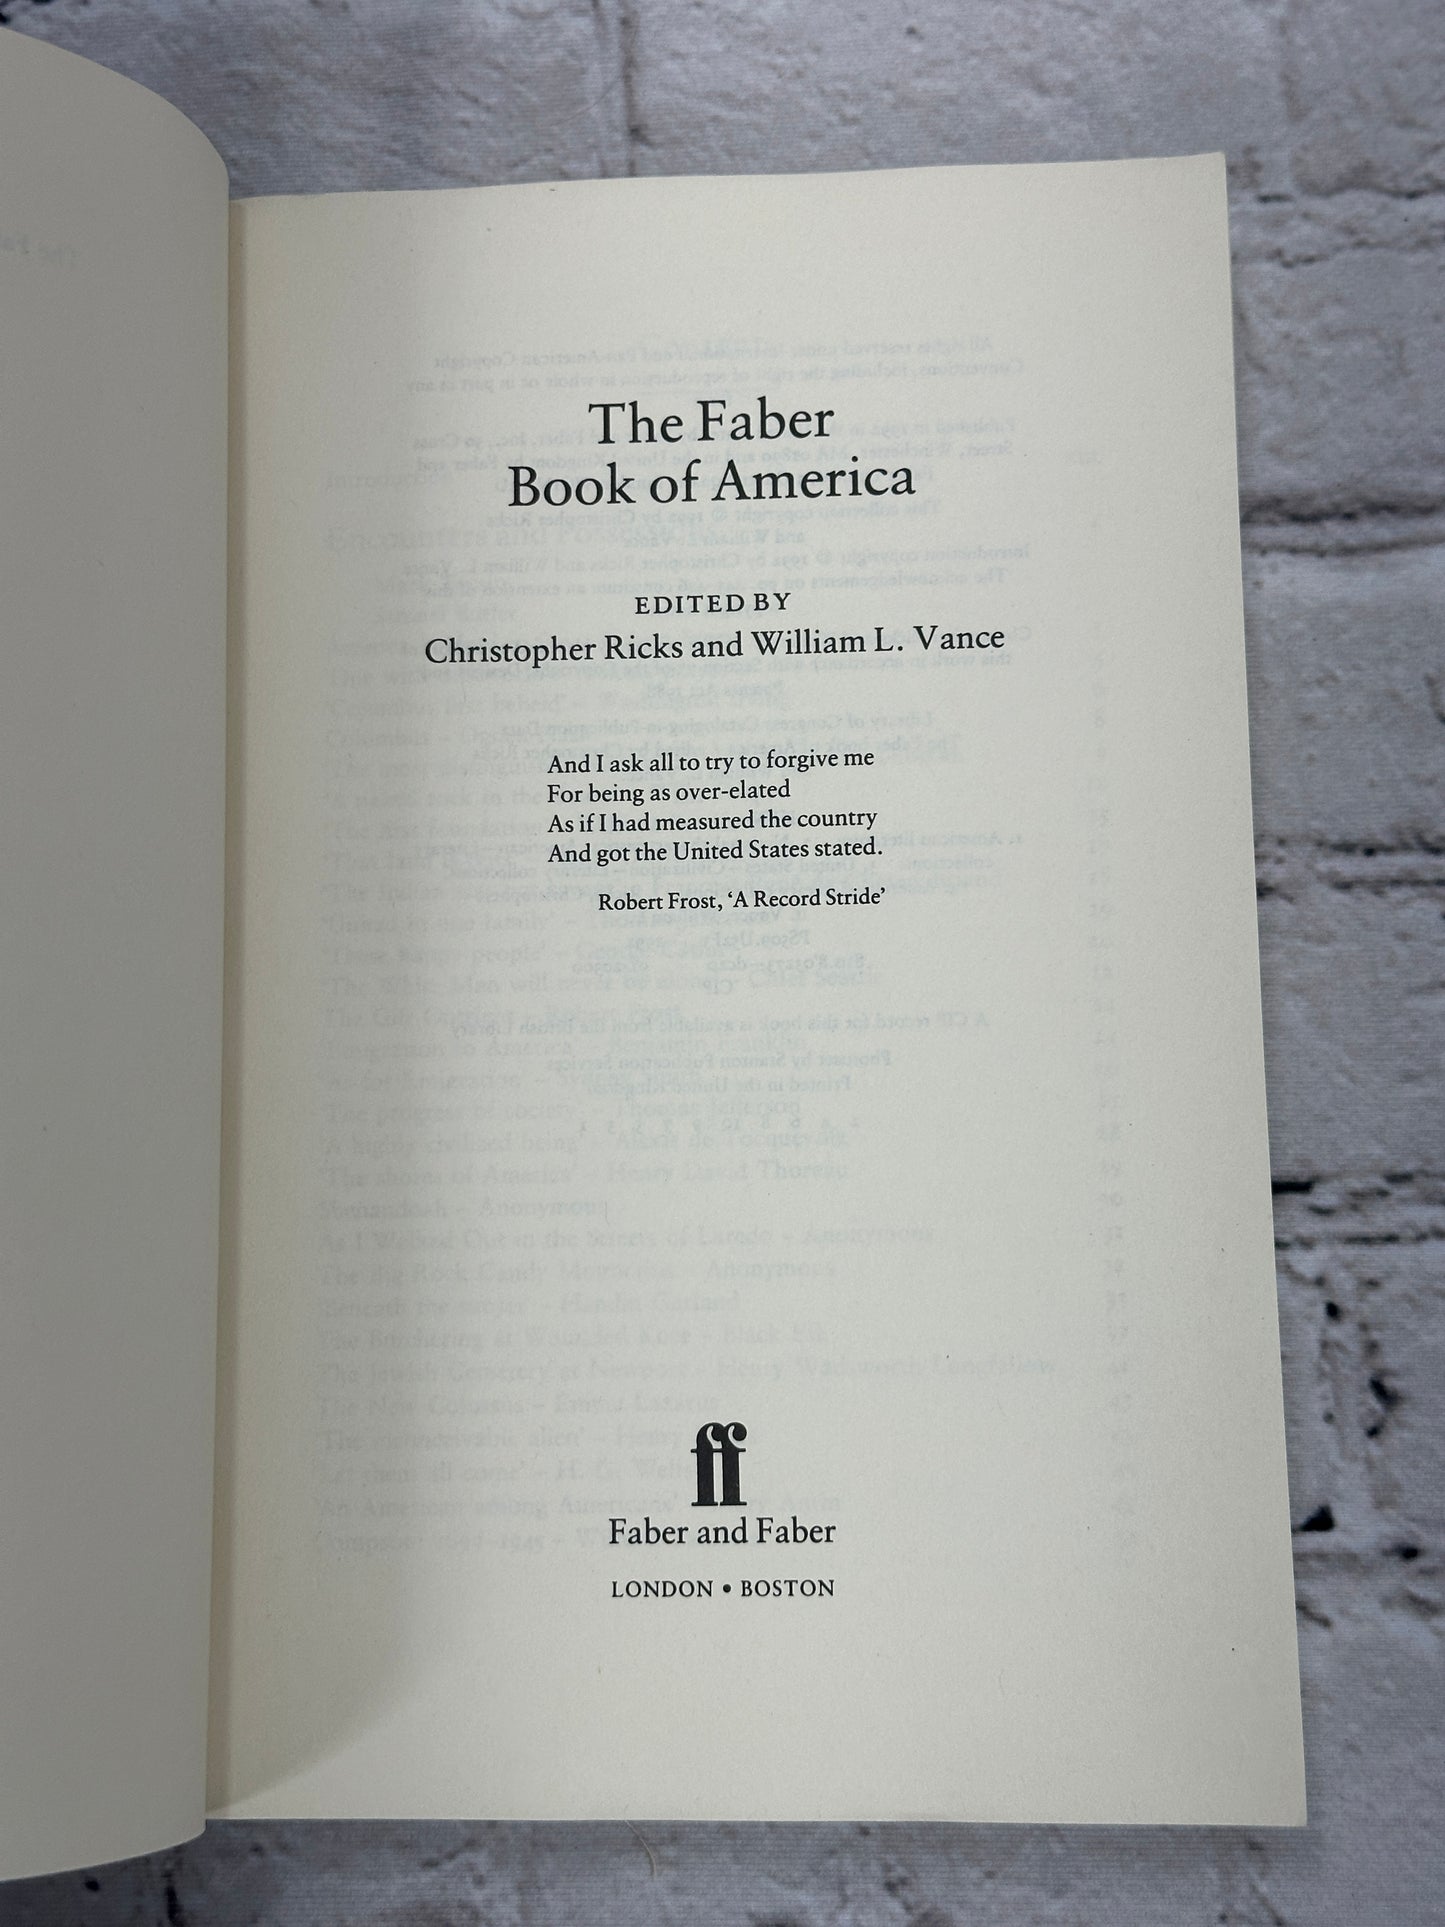 The Faber Book of America By Christopher Ricks & William L. Vance [1992]